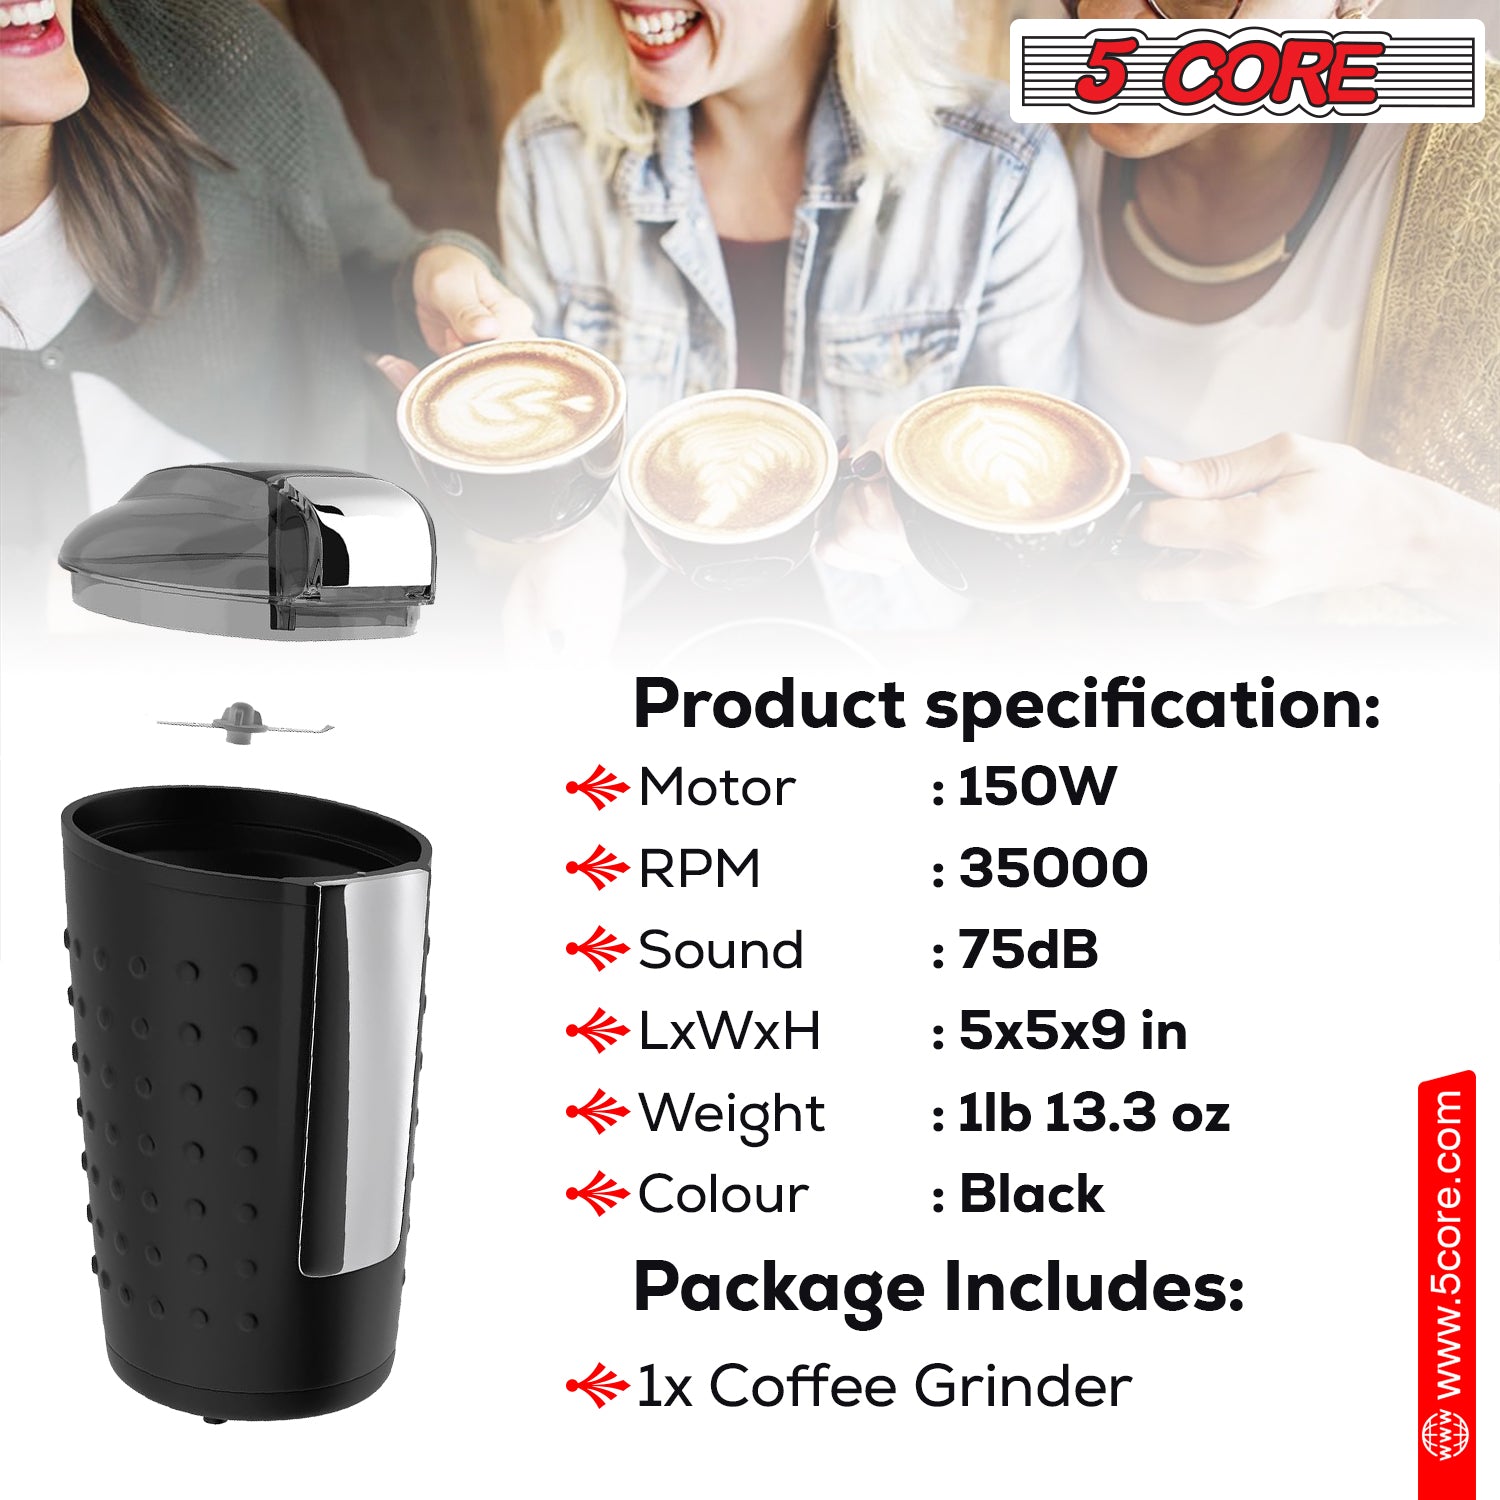 Maximize convenience with the electric coffee grinder's 85 gram capacity.